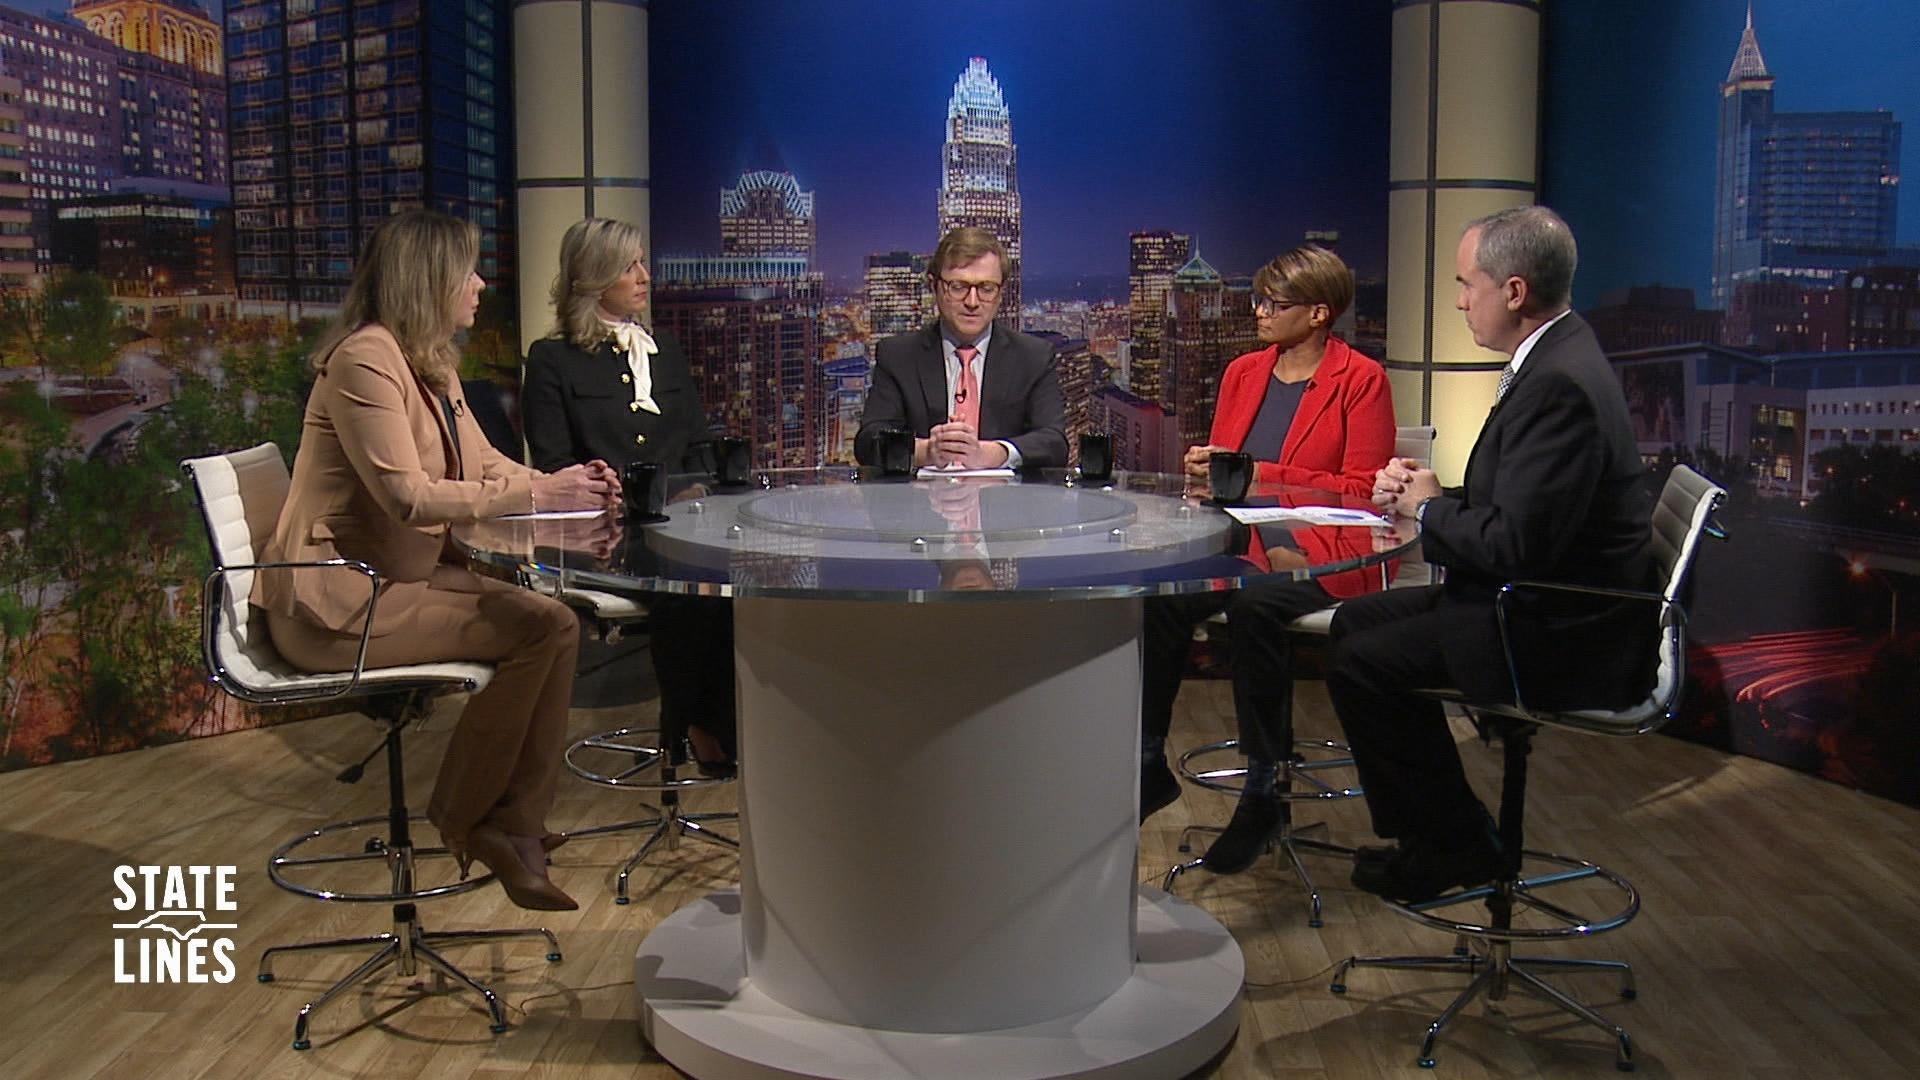 Sitting around the State Lines round table are Sen. Mary Wills Bode (D-District 18), Sen. Benton Sawrey (R-District 10), Donna King (Carolina Journal), Lynn Bonner (NC Newsline) and State Lines Host, Kelly McCullen